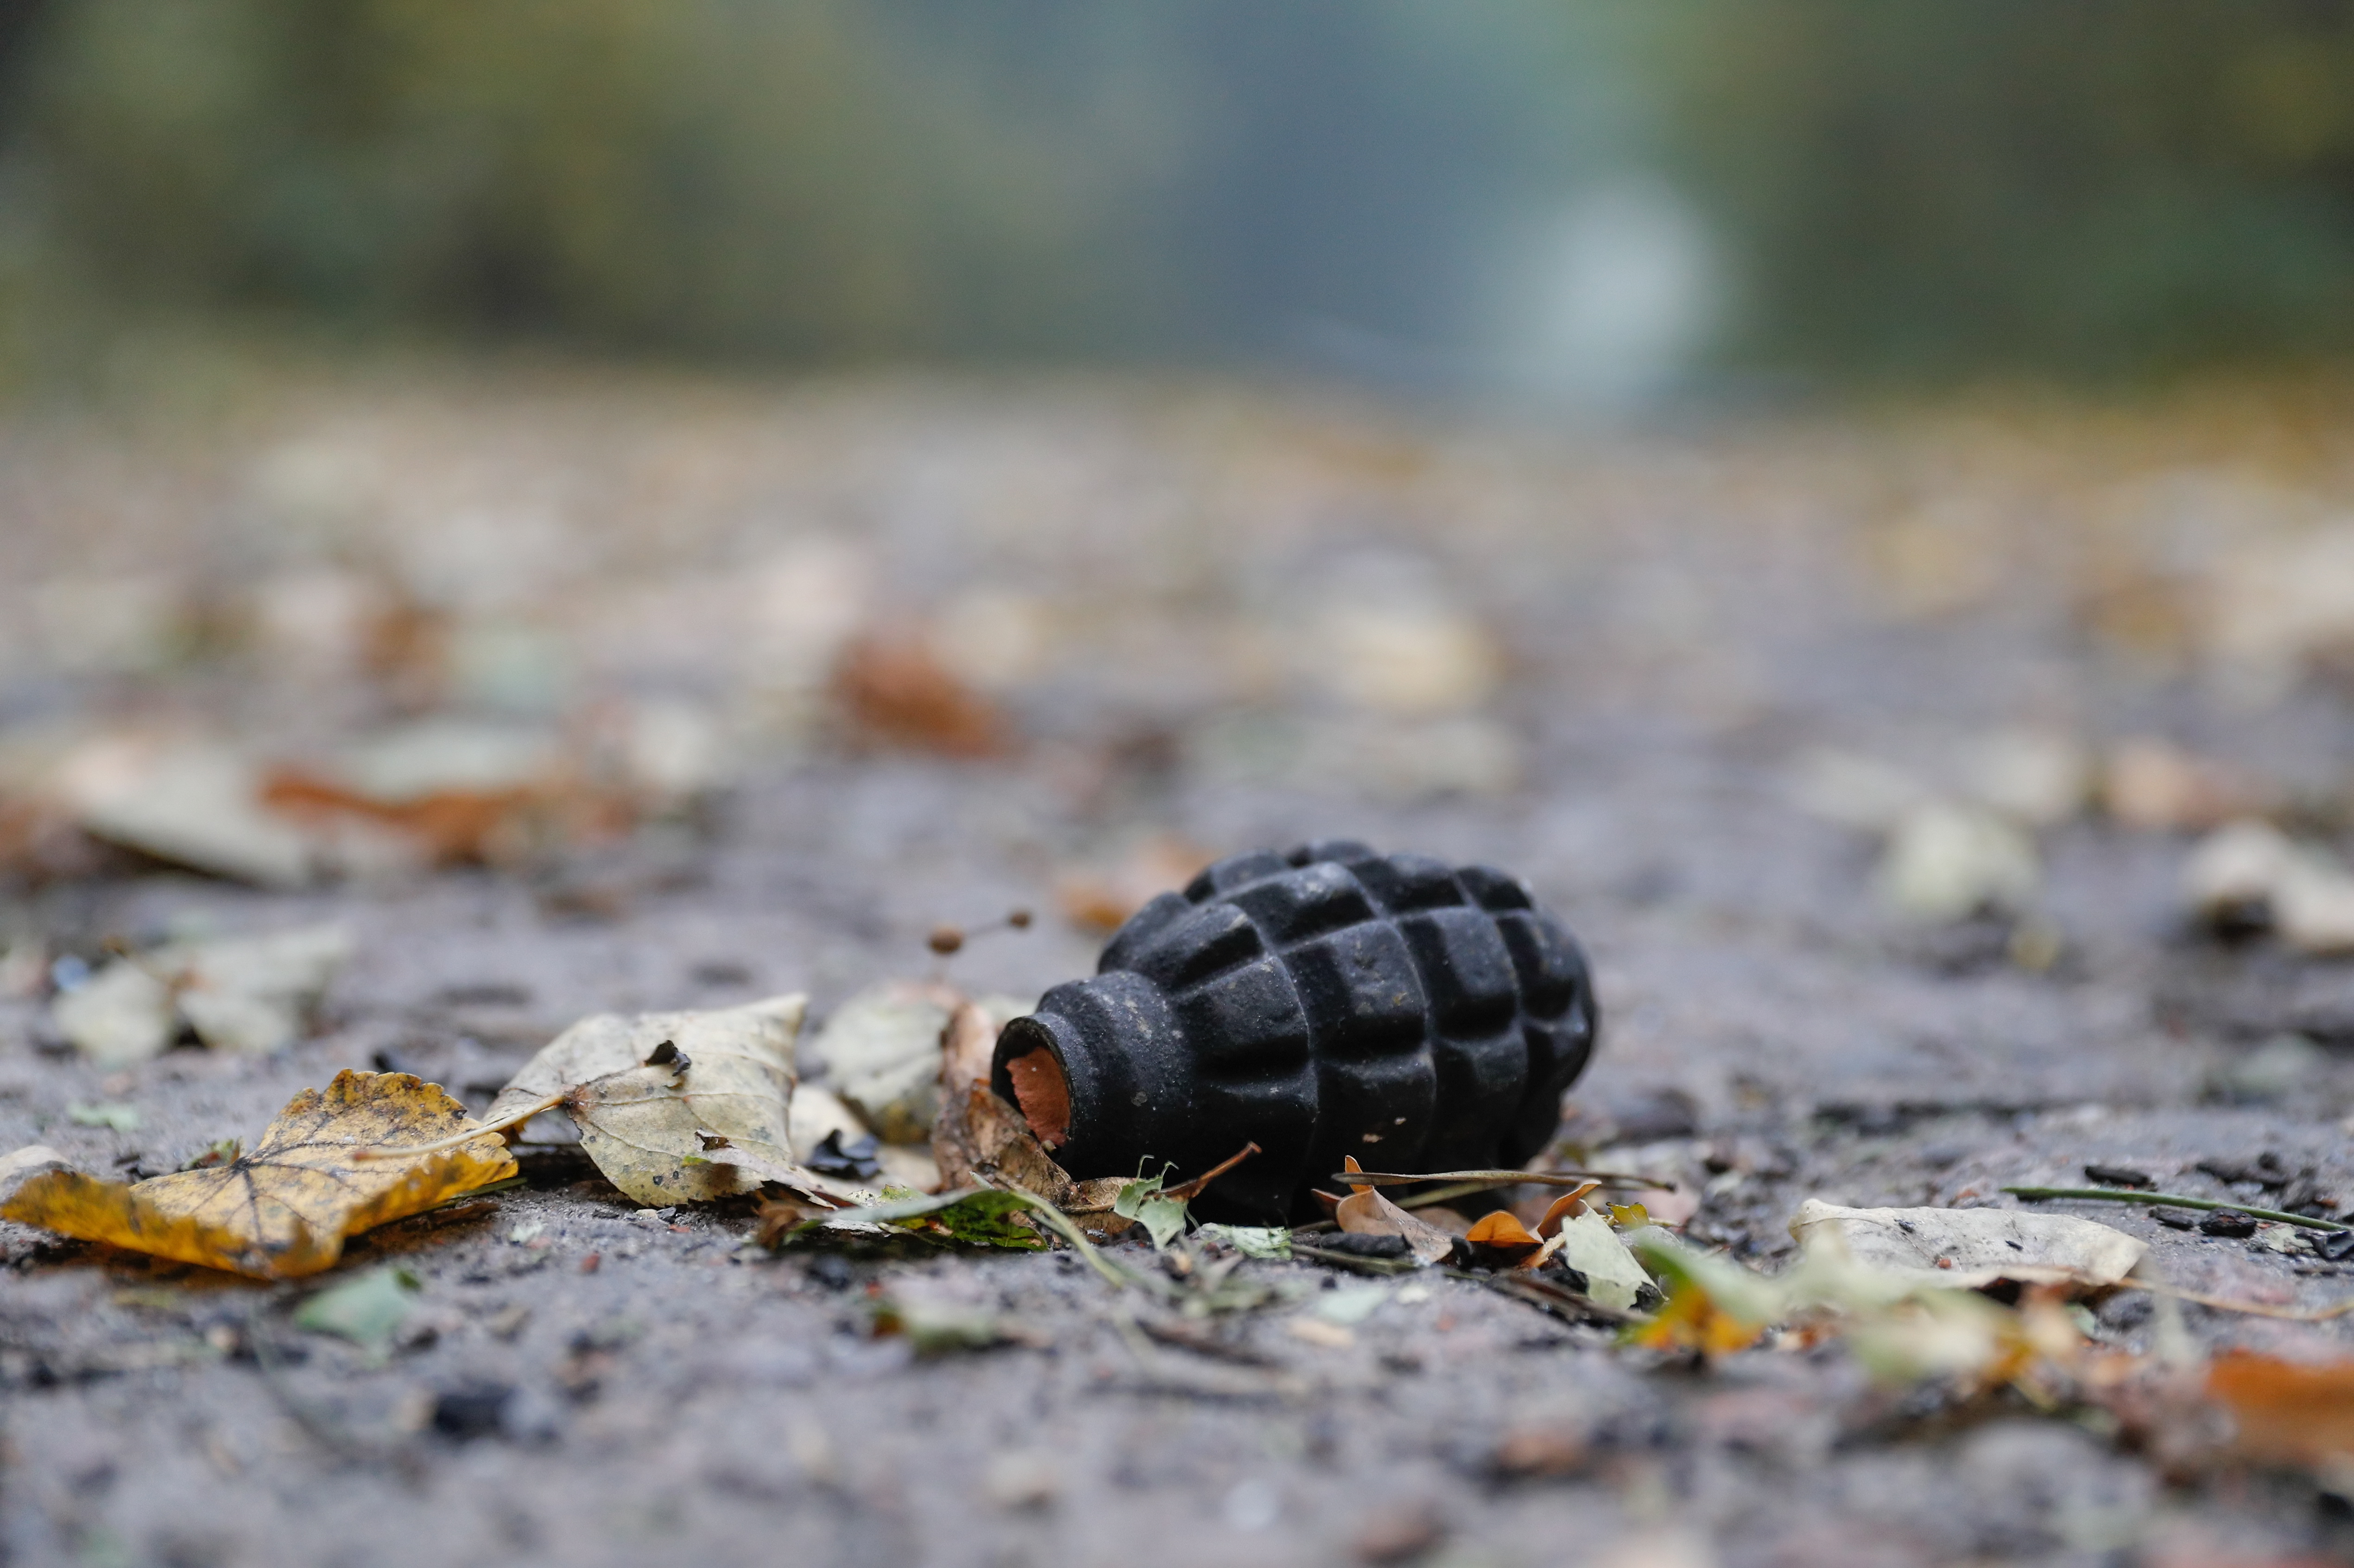 epa07081018 A fragmentation hand grenade shell without fuze lies on a road near an ammunition depot of the Ukrainian Armed Forces near the city of Ichnya, Chernihiv area, Ukraine, 09 October 2018. Munitions including heavy artillery ammunition and 122mm rockets for multiple rocket launchers detonated after a fire broke out at the ammunition depot. Deputy Head of the General Staff of the Armed Forces of Ukraine Rodion Tymoshenko told the media that the fire at the 6th arsenal started with four explosions in a warehouse.  EPA/SERGEY DOLZHENKO